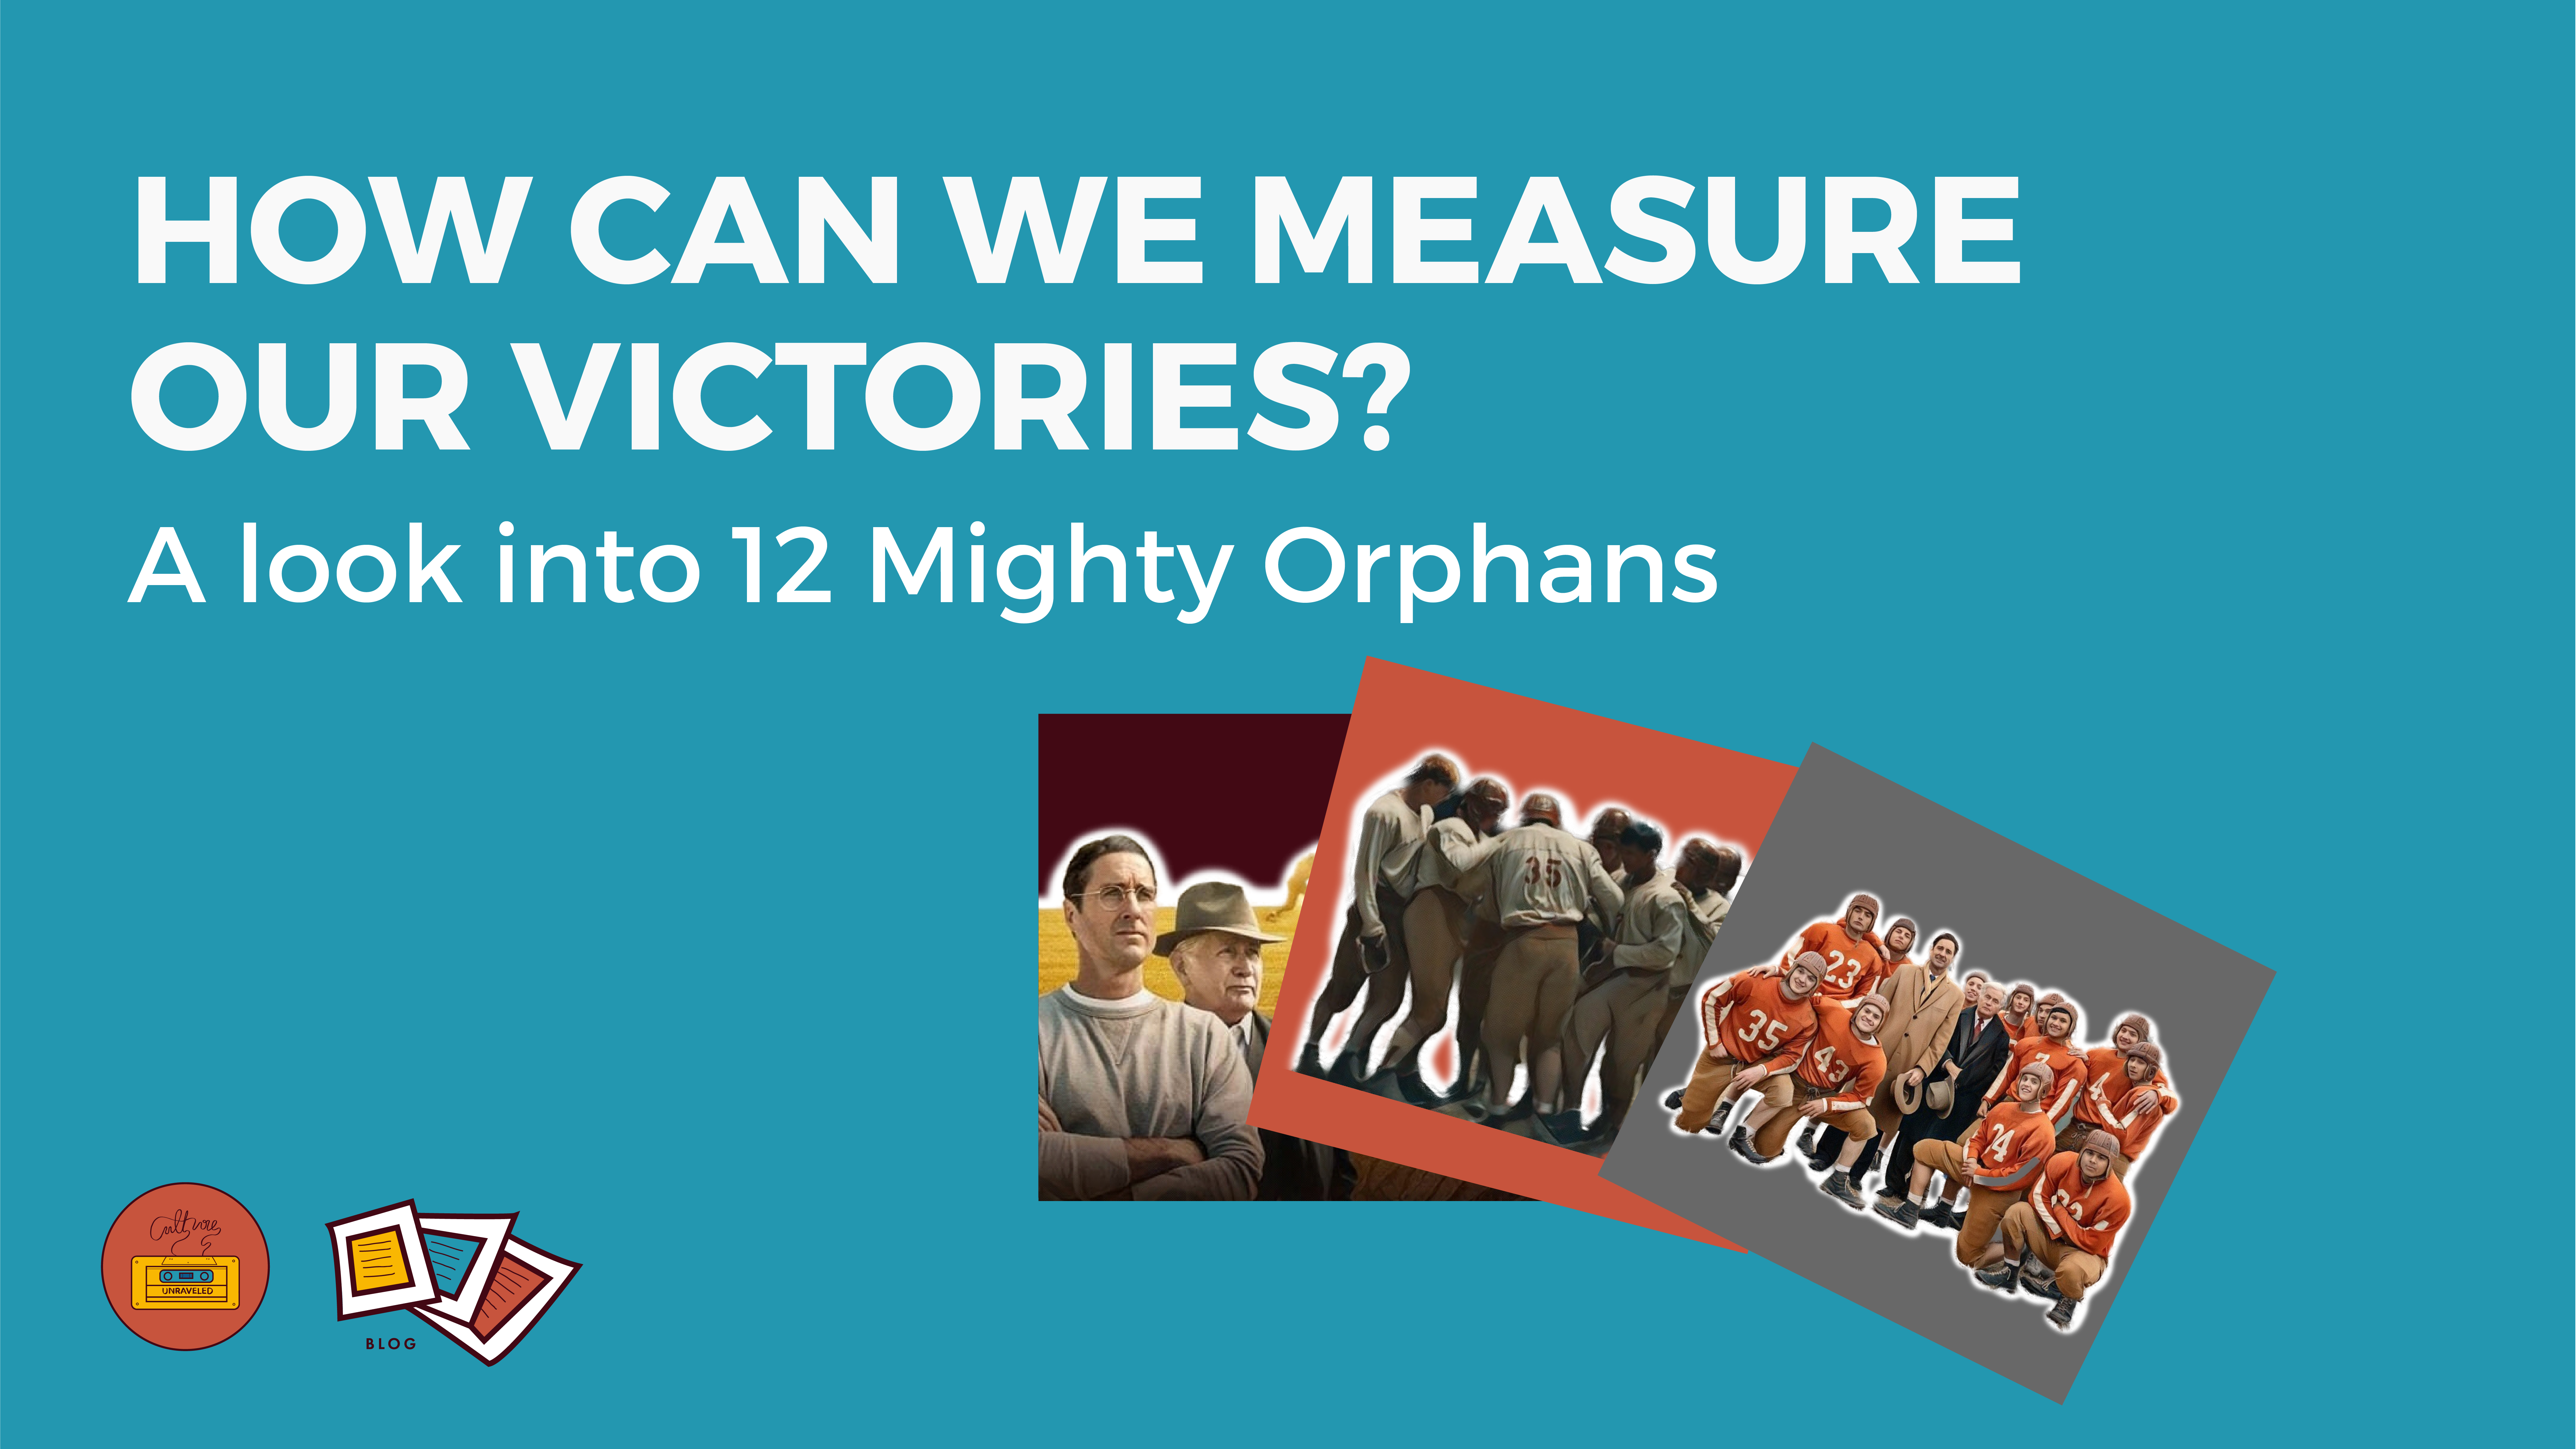 How can we Measure our Victories? A Look into 12 Mighty Orphans